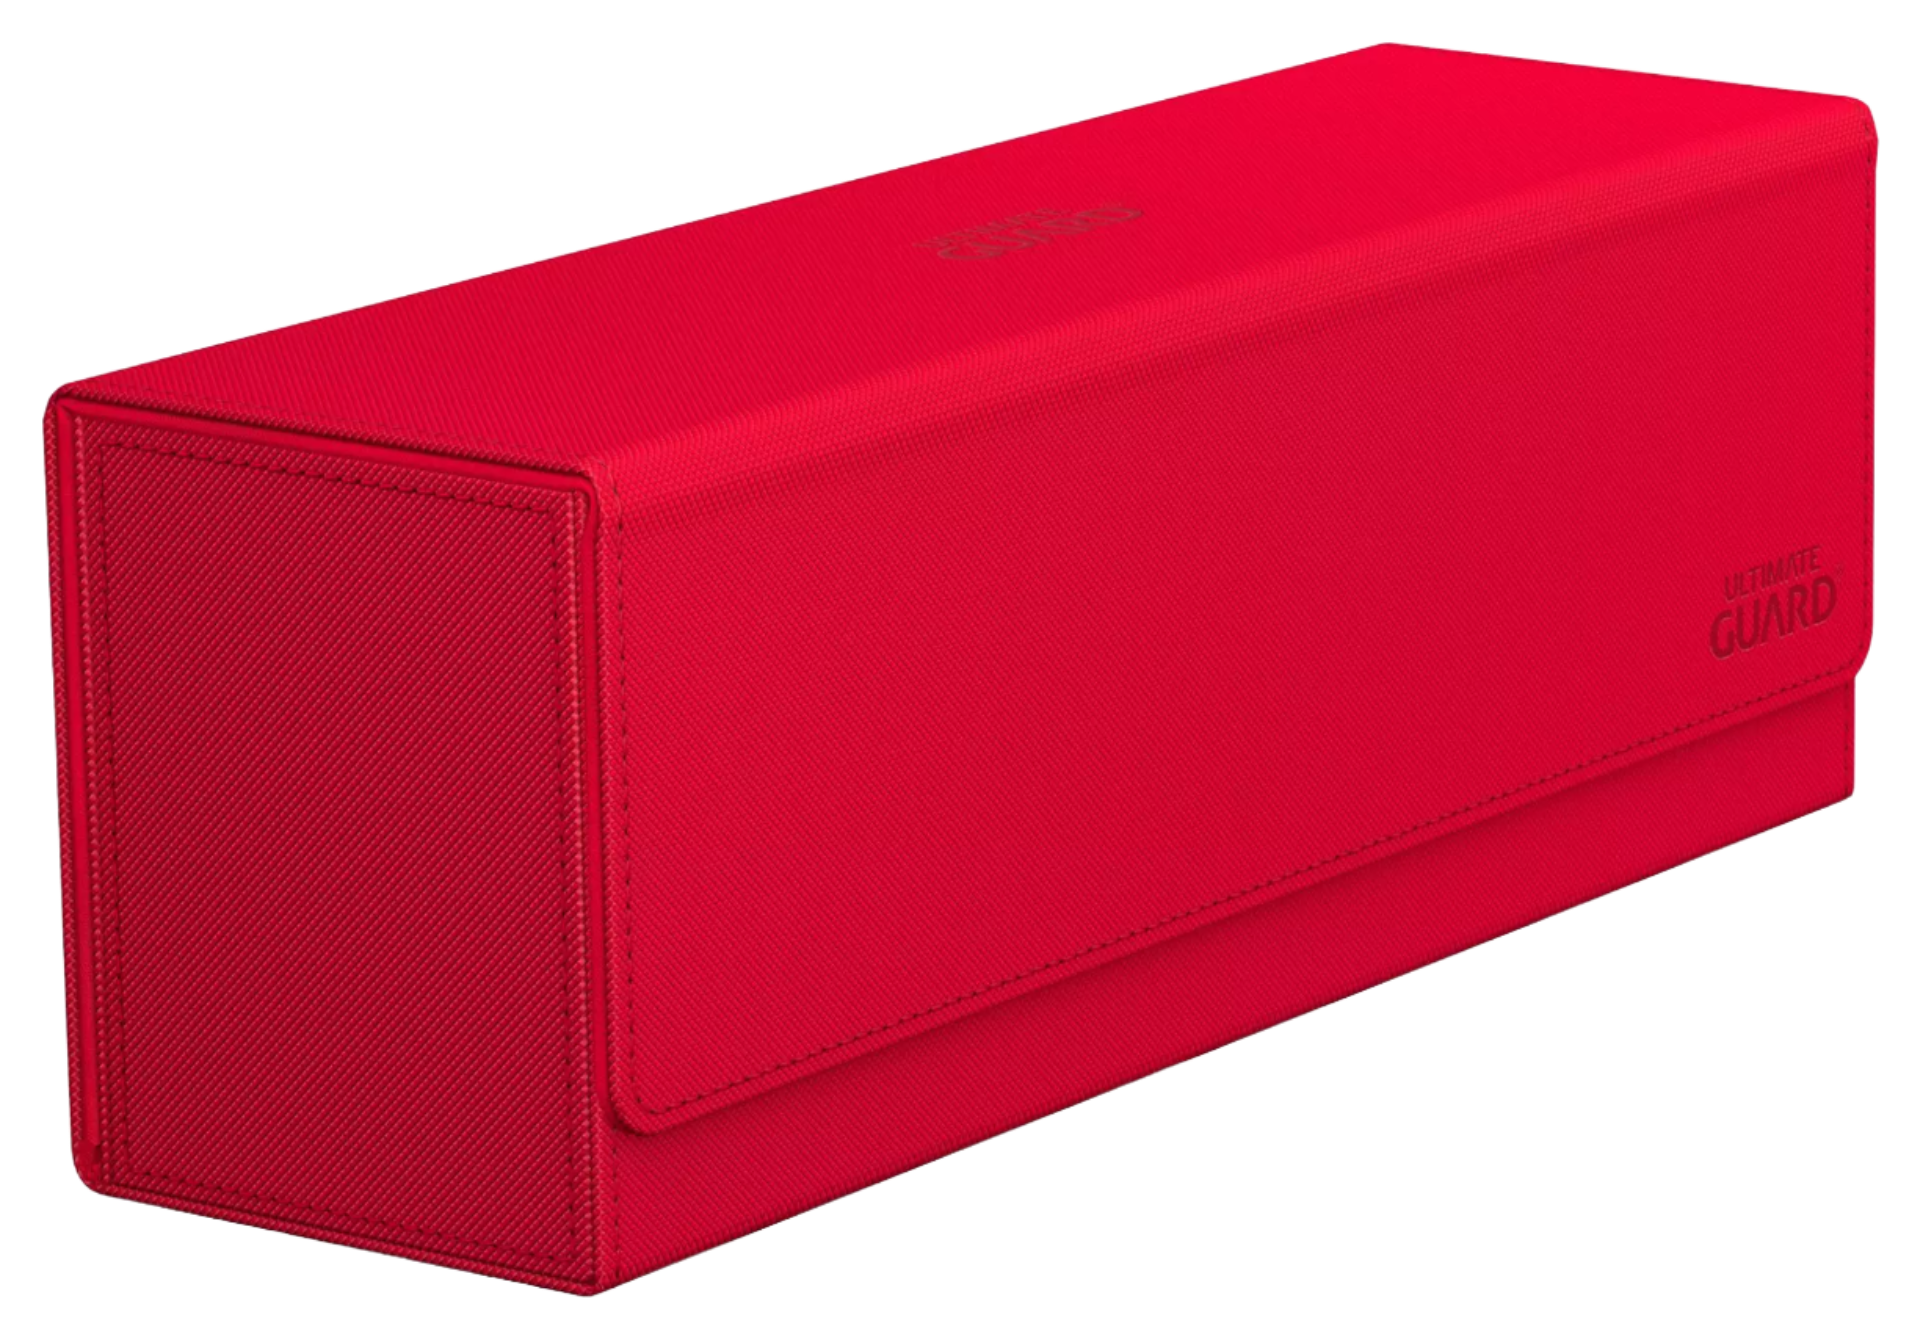 Ultimate Guard - Arkhive XenoSkin - 400+ Card Case - Monocolor Red